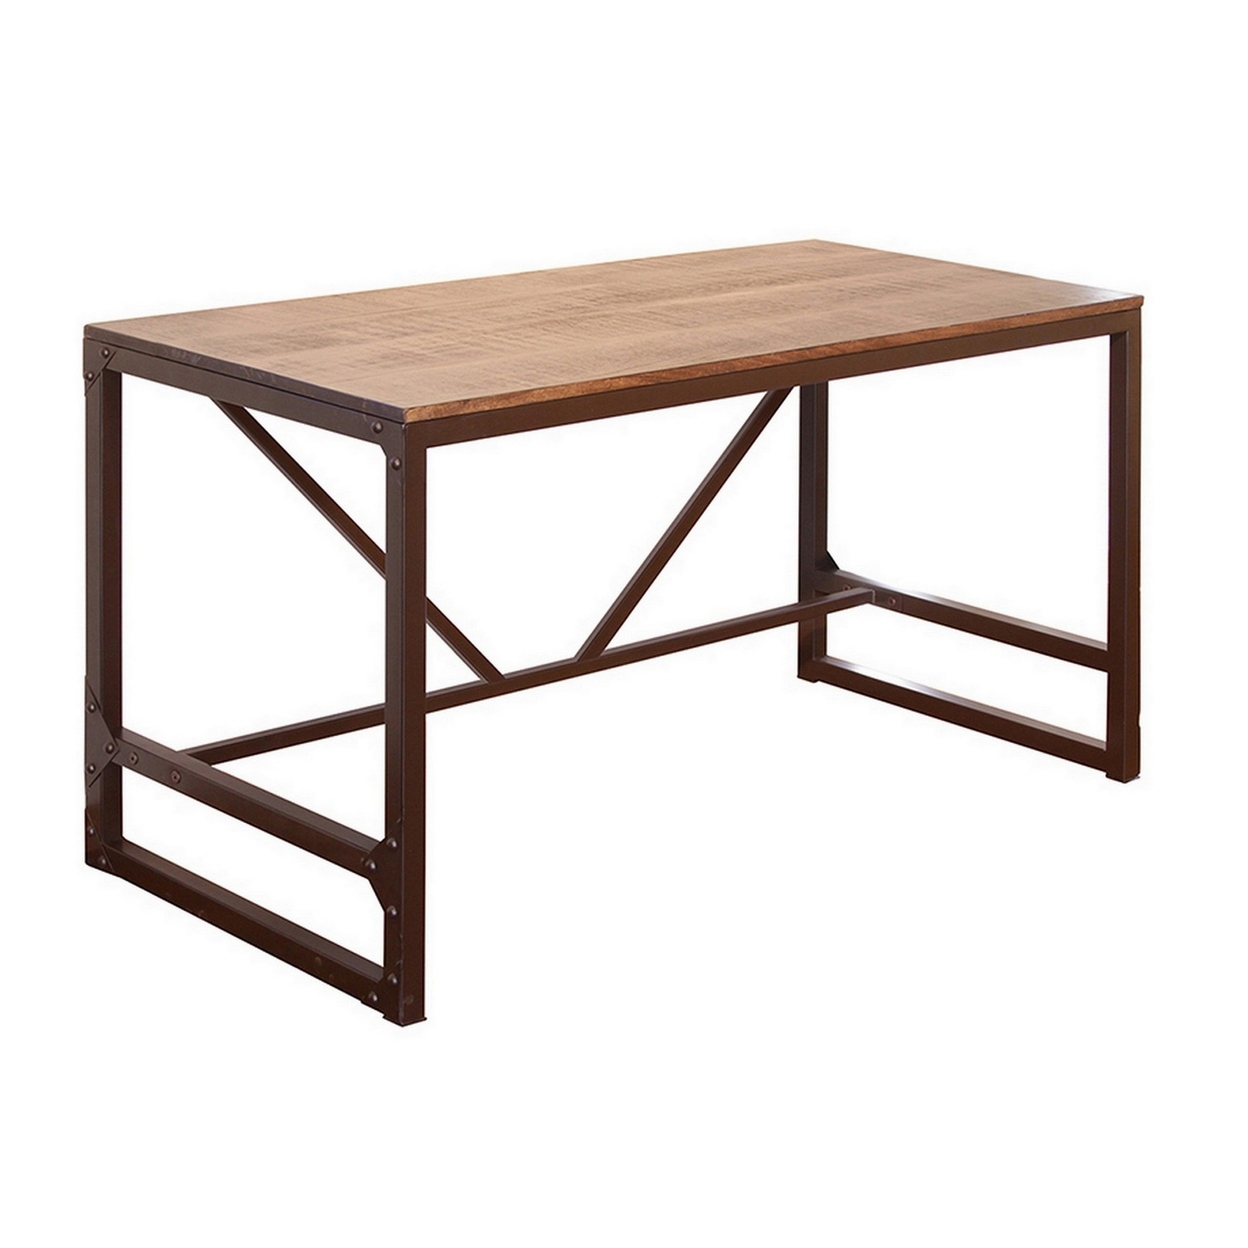 Itzy 59 Inch Rustic Office Desk With Iron Base, Pine And Mango Wood, Brown- Saltoro Sherpi